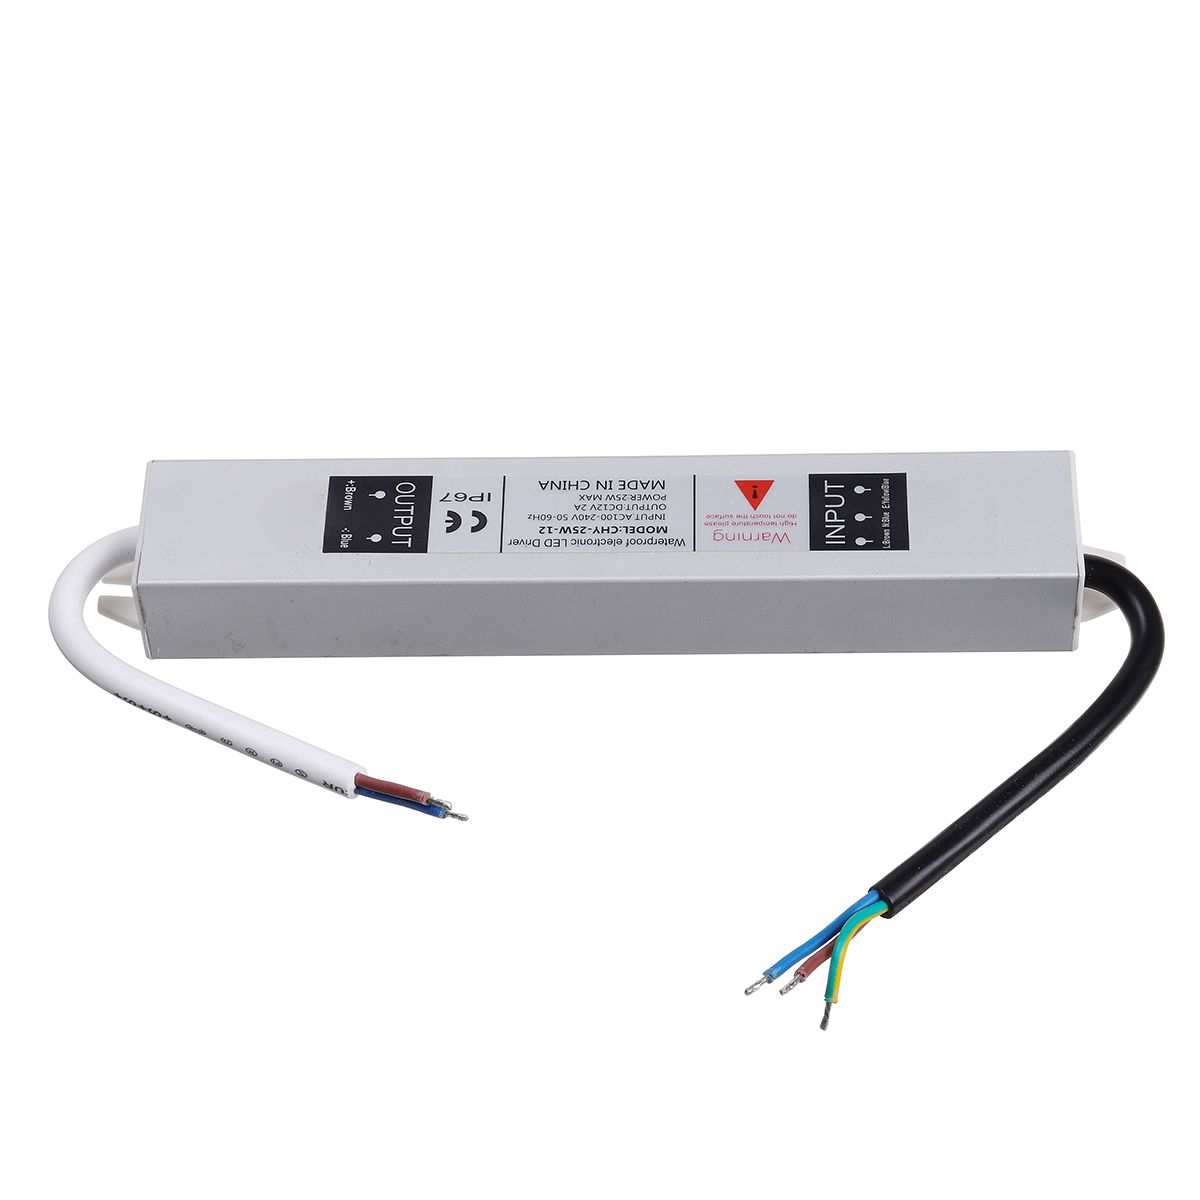 AC110V-240V-to-DC12V-24W-2A-LED-Waterproof-Switching-Power-Supply-1468180